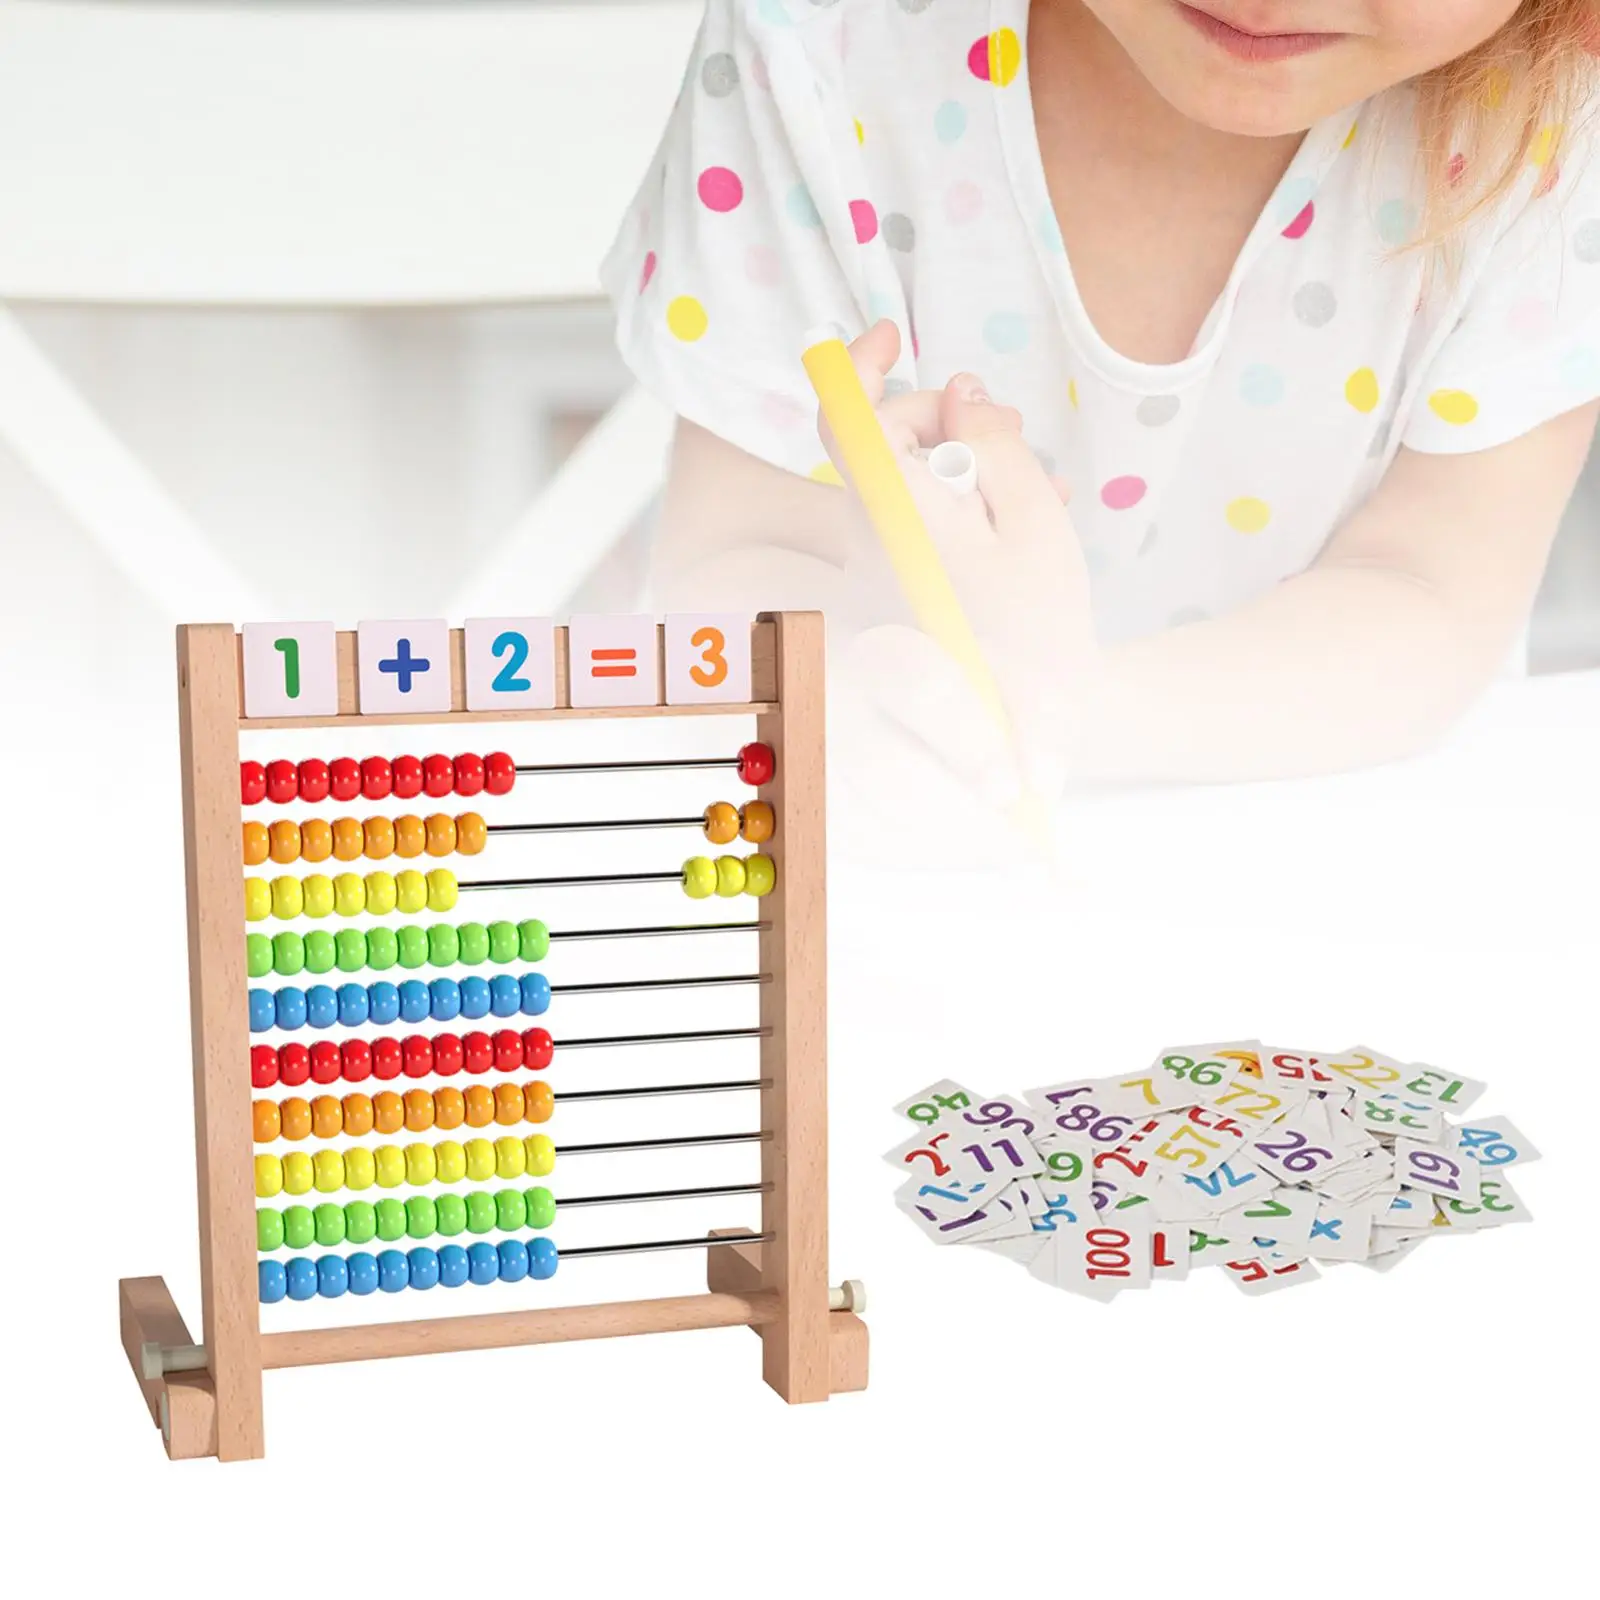 Add Subtract Abacus Ten Frame Set Educational Counting Frames Toy Montessori for Elementary Kids Kindergarten Preschool Toddlers